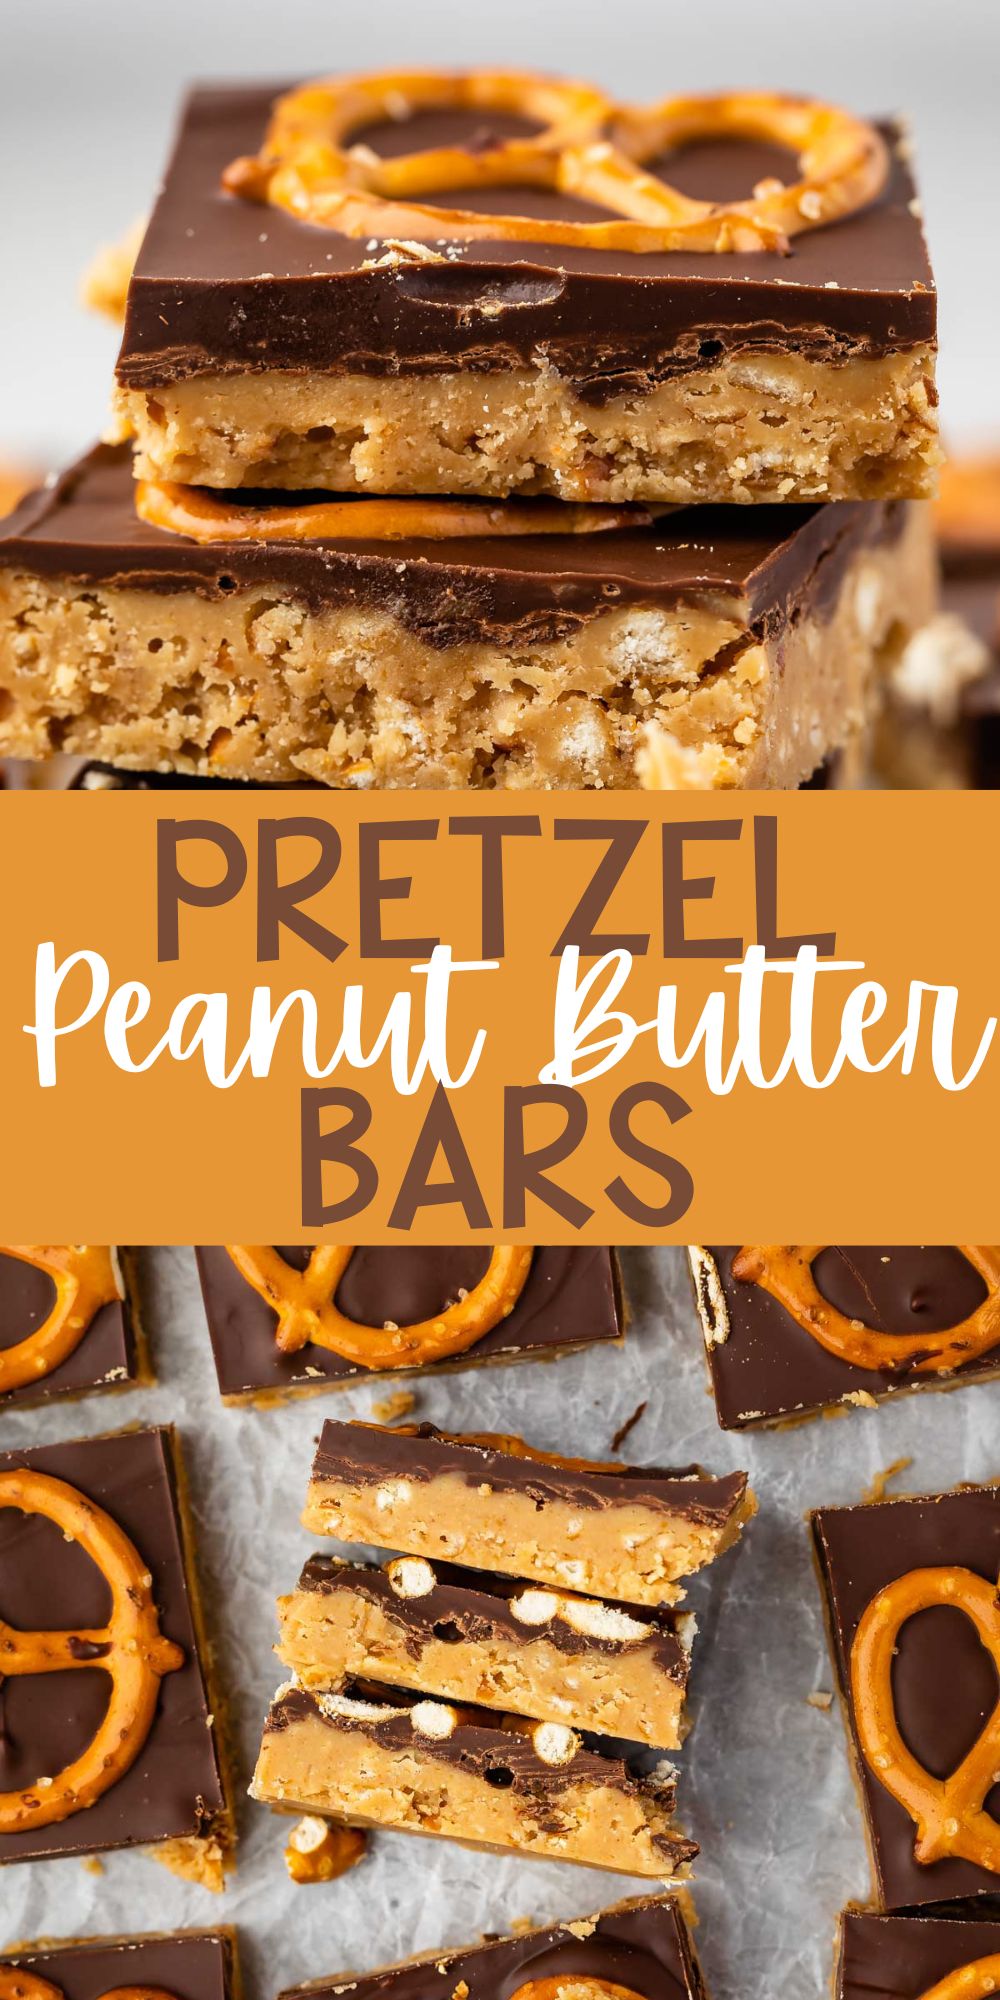 two photos of stacked peanut butter bars with a layer of chocolate on top with a pretzel with words on the image.